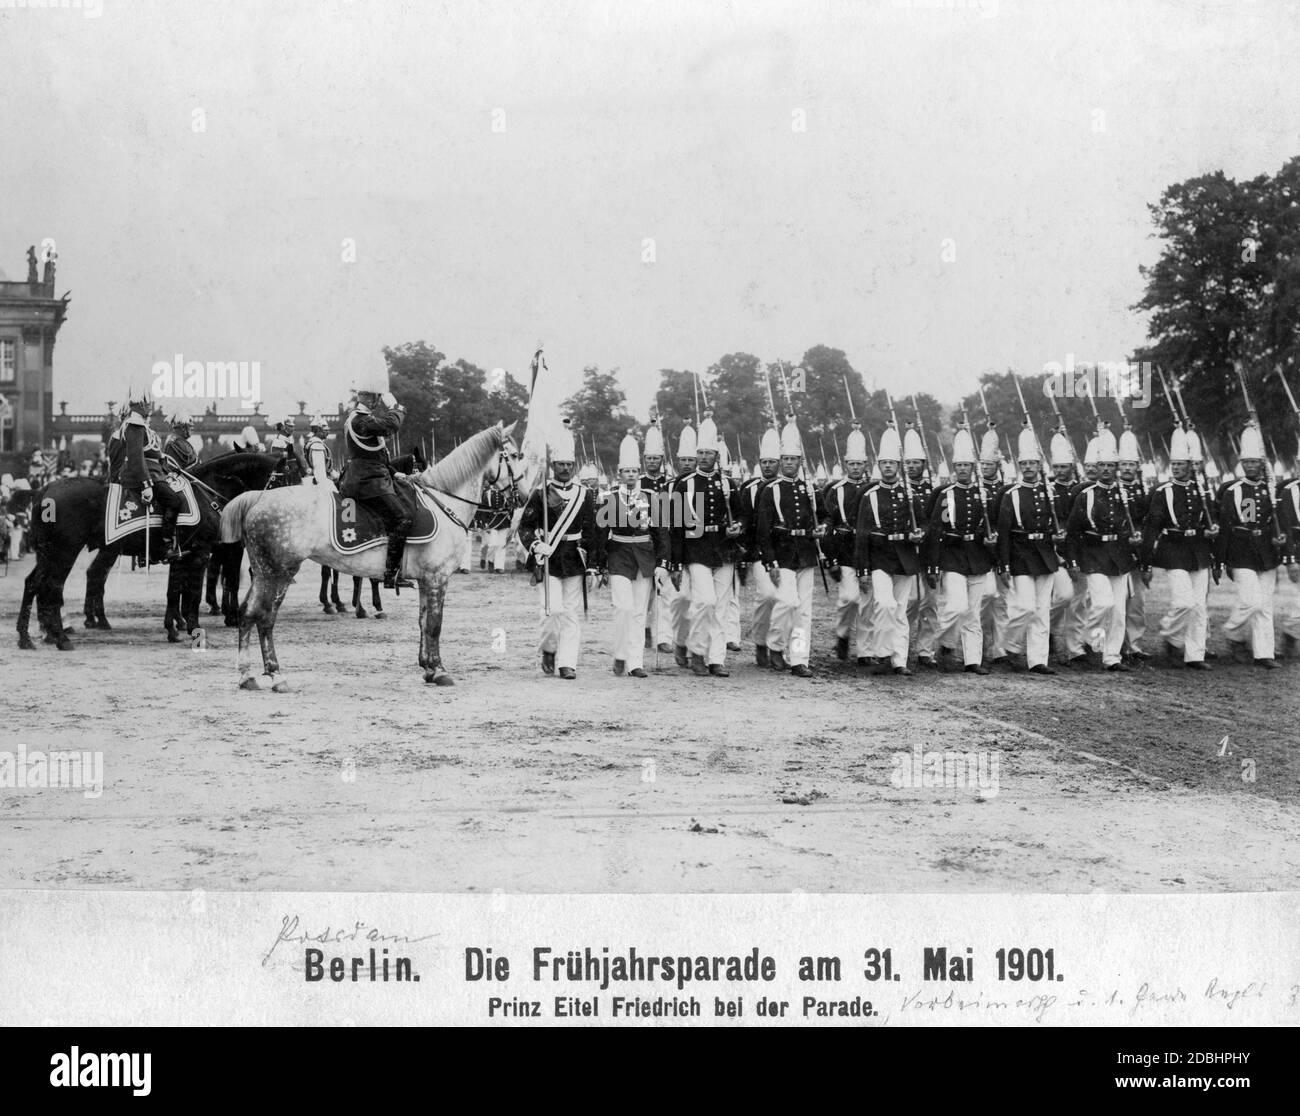 Prince Eitel Friedrich, son of Emperor Wilhelm II, at the Berlin Spring Parade. The 1st Foot Guard Regiment is marching past him. Stock Photo